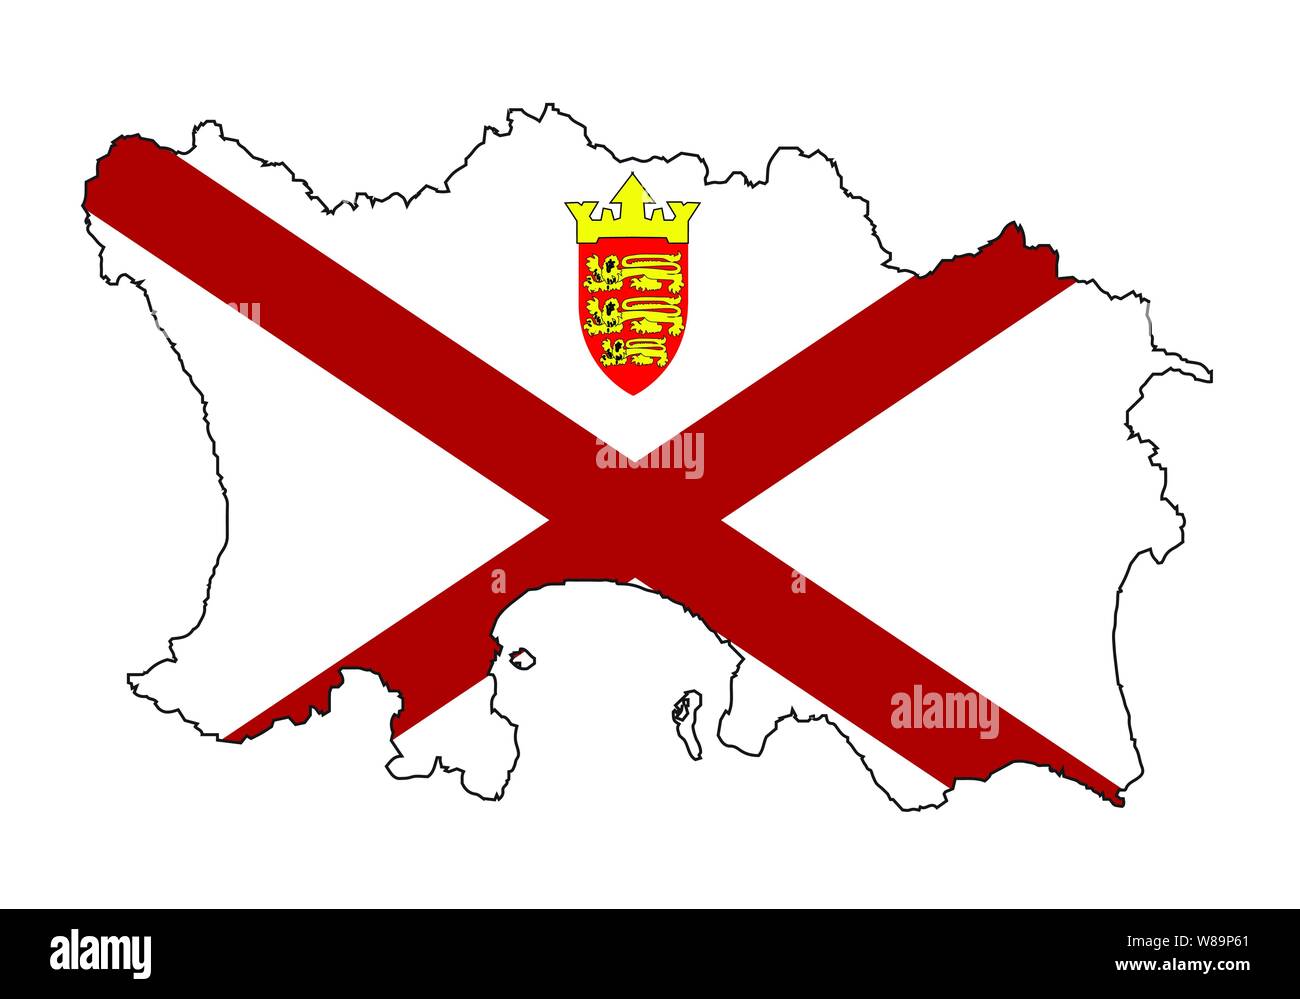 Silhouette outline map of The Channel Island of Jersey over a white background with the islands flag inset Stock Vector